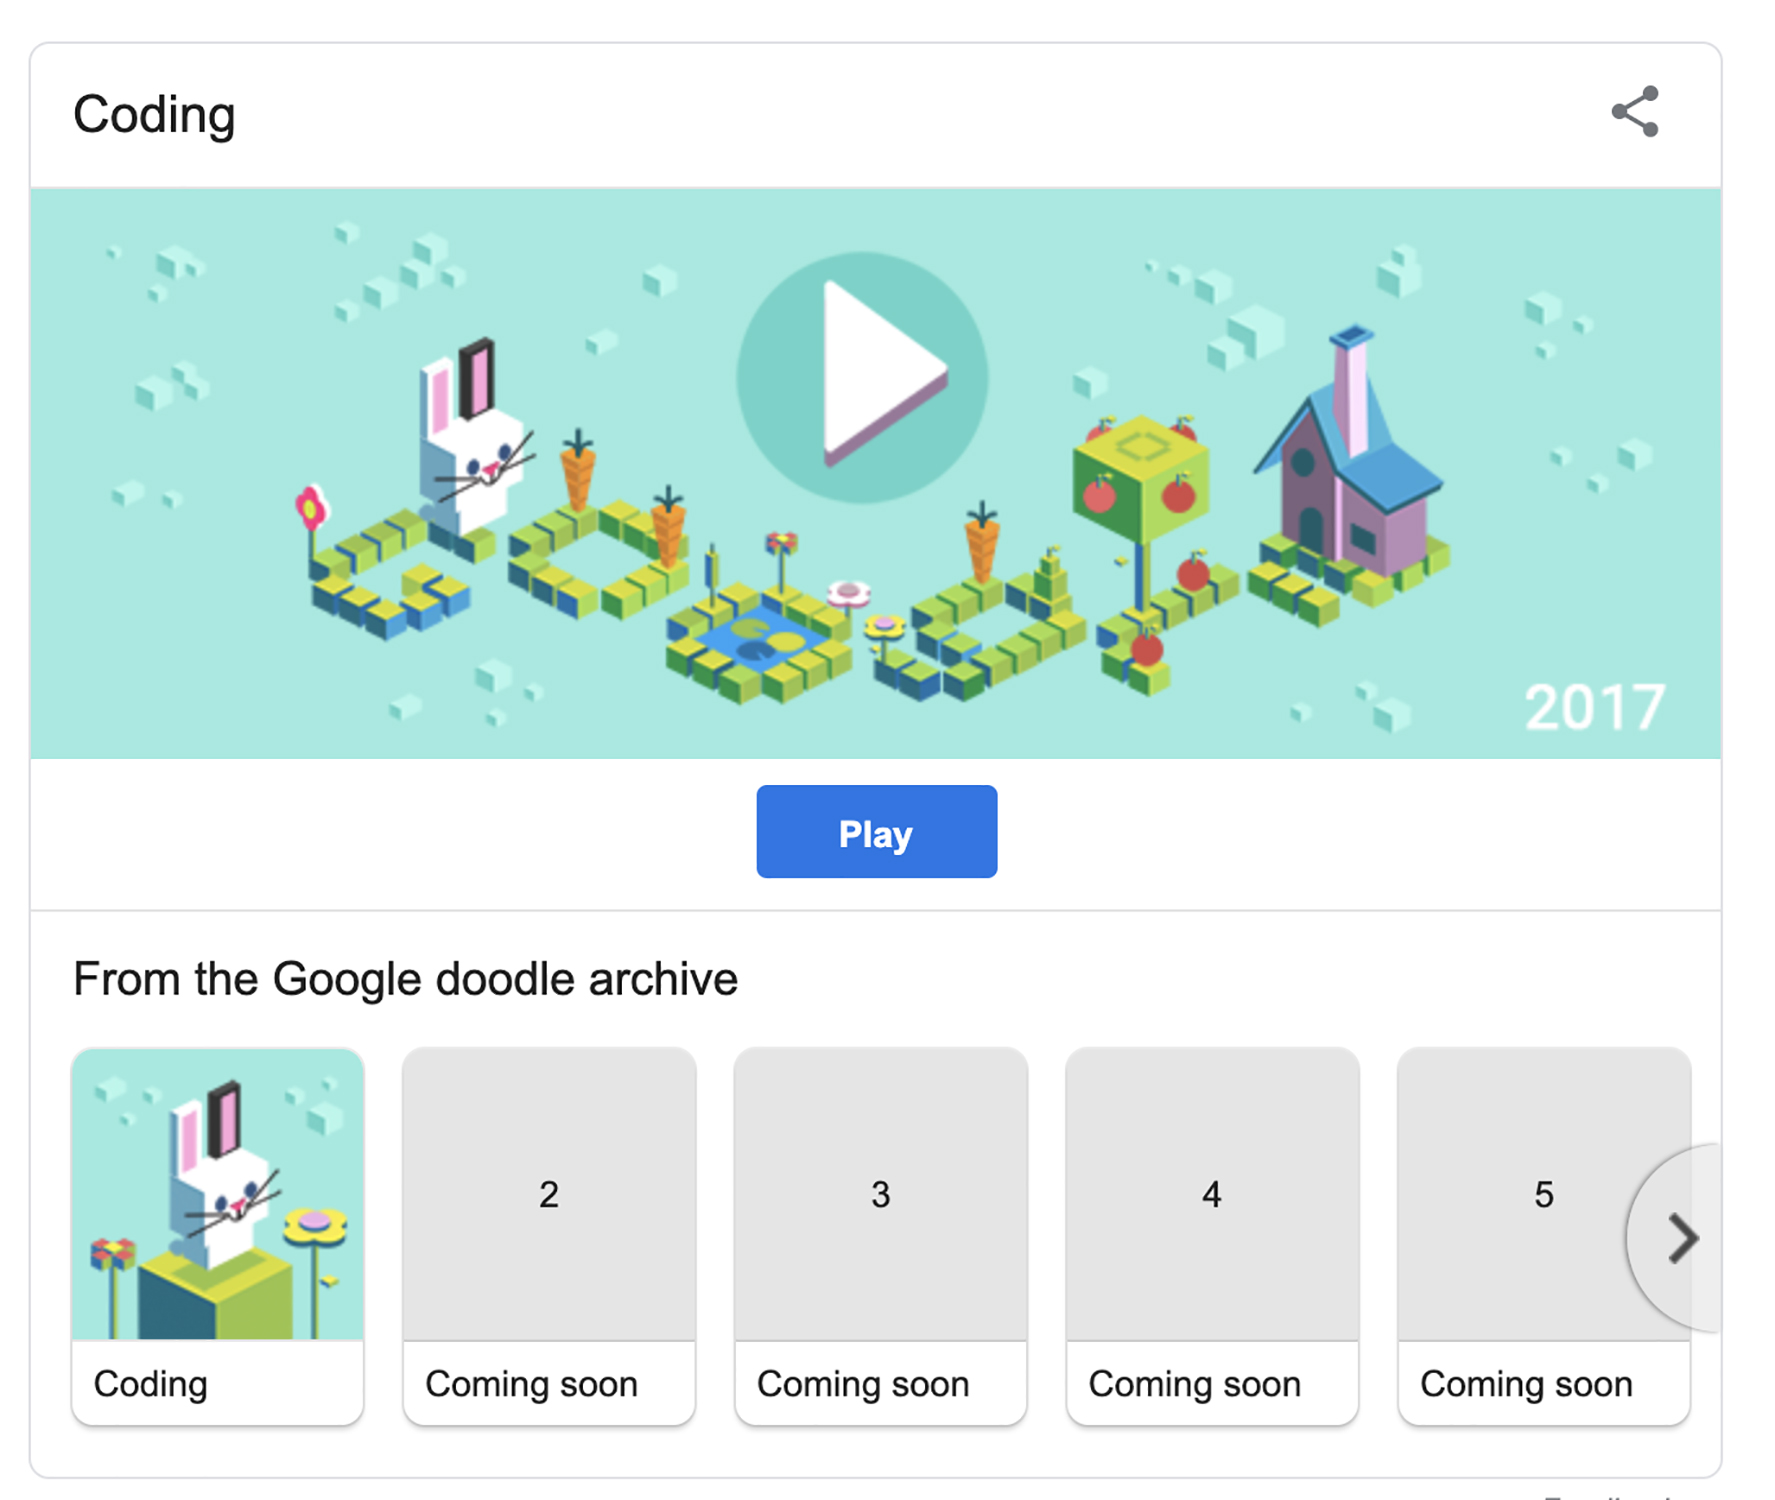 Google Brings Back Old Google Doodle Games to Keep Us Entertained -  Techlicious